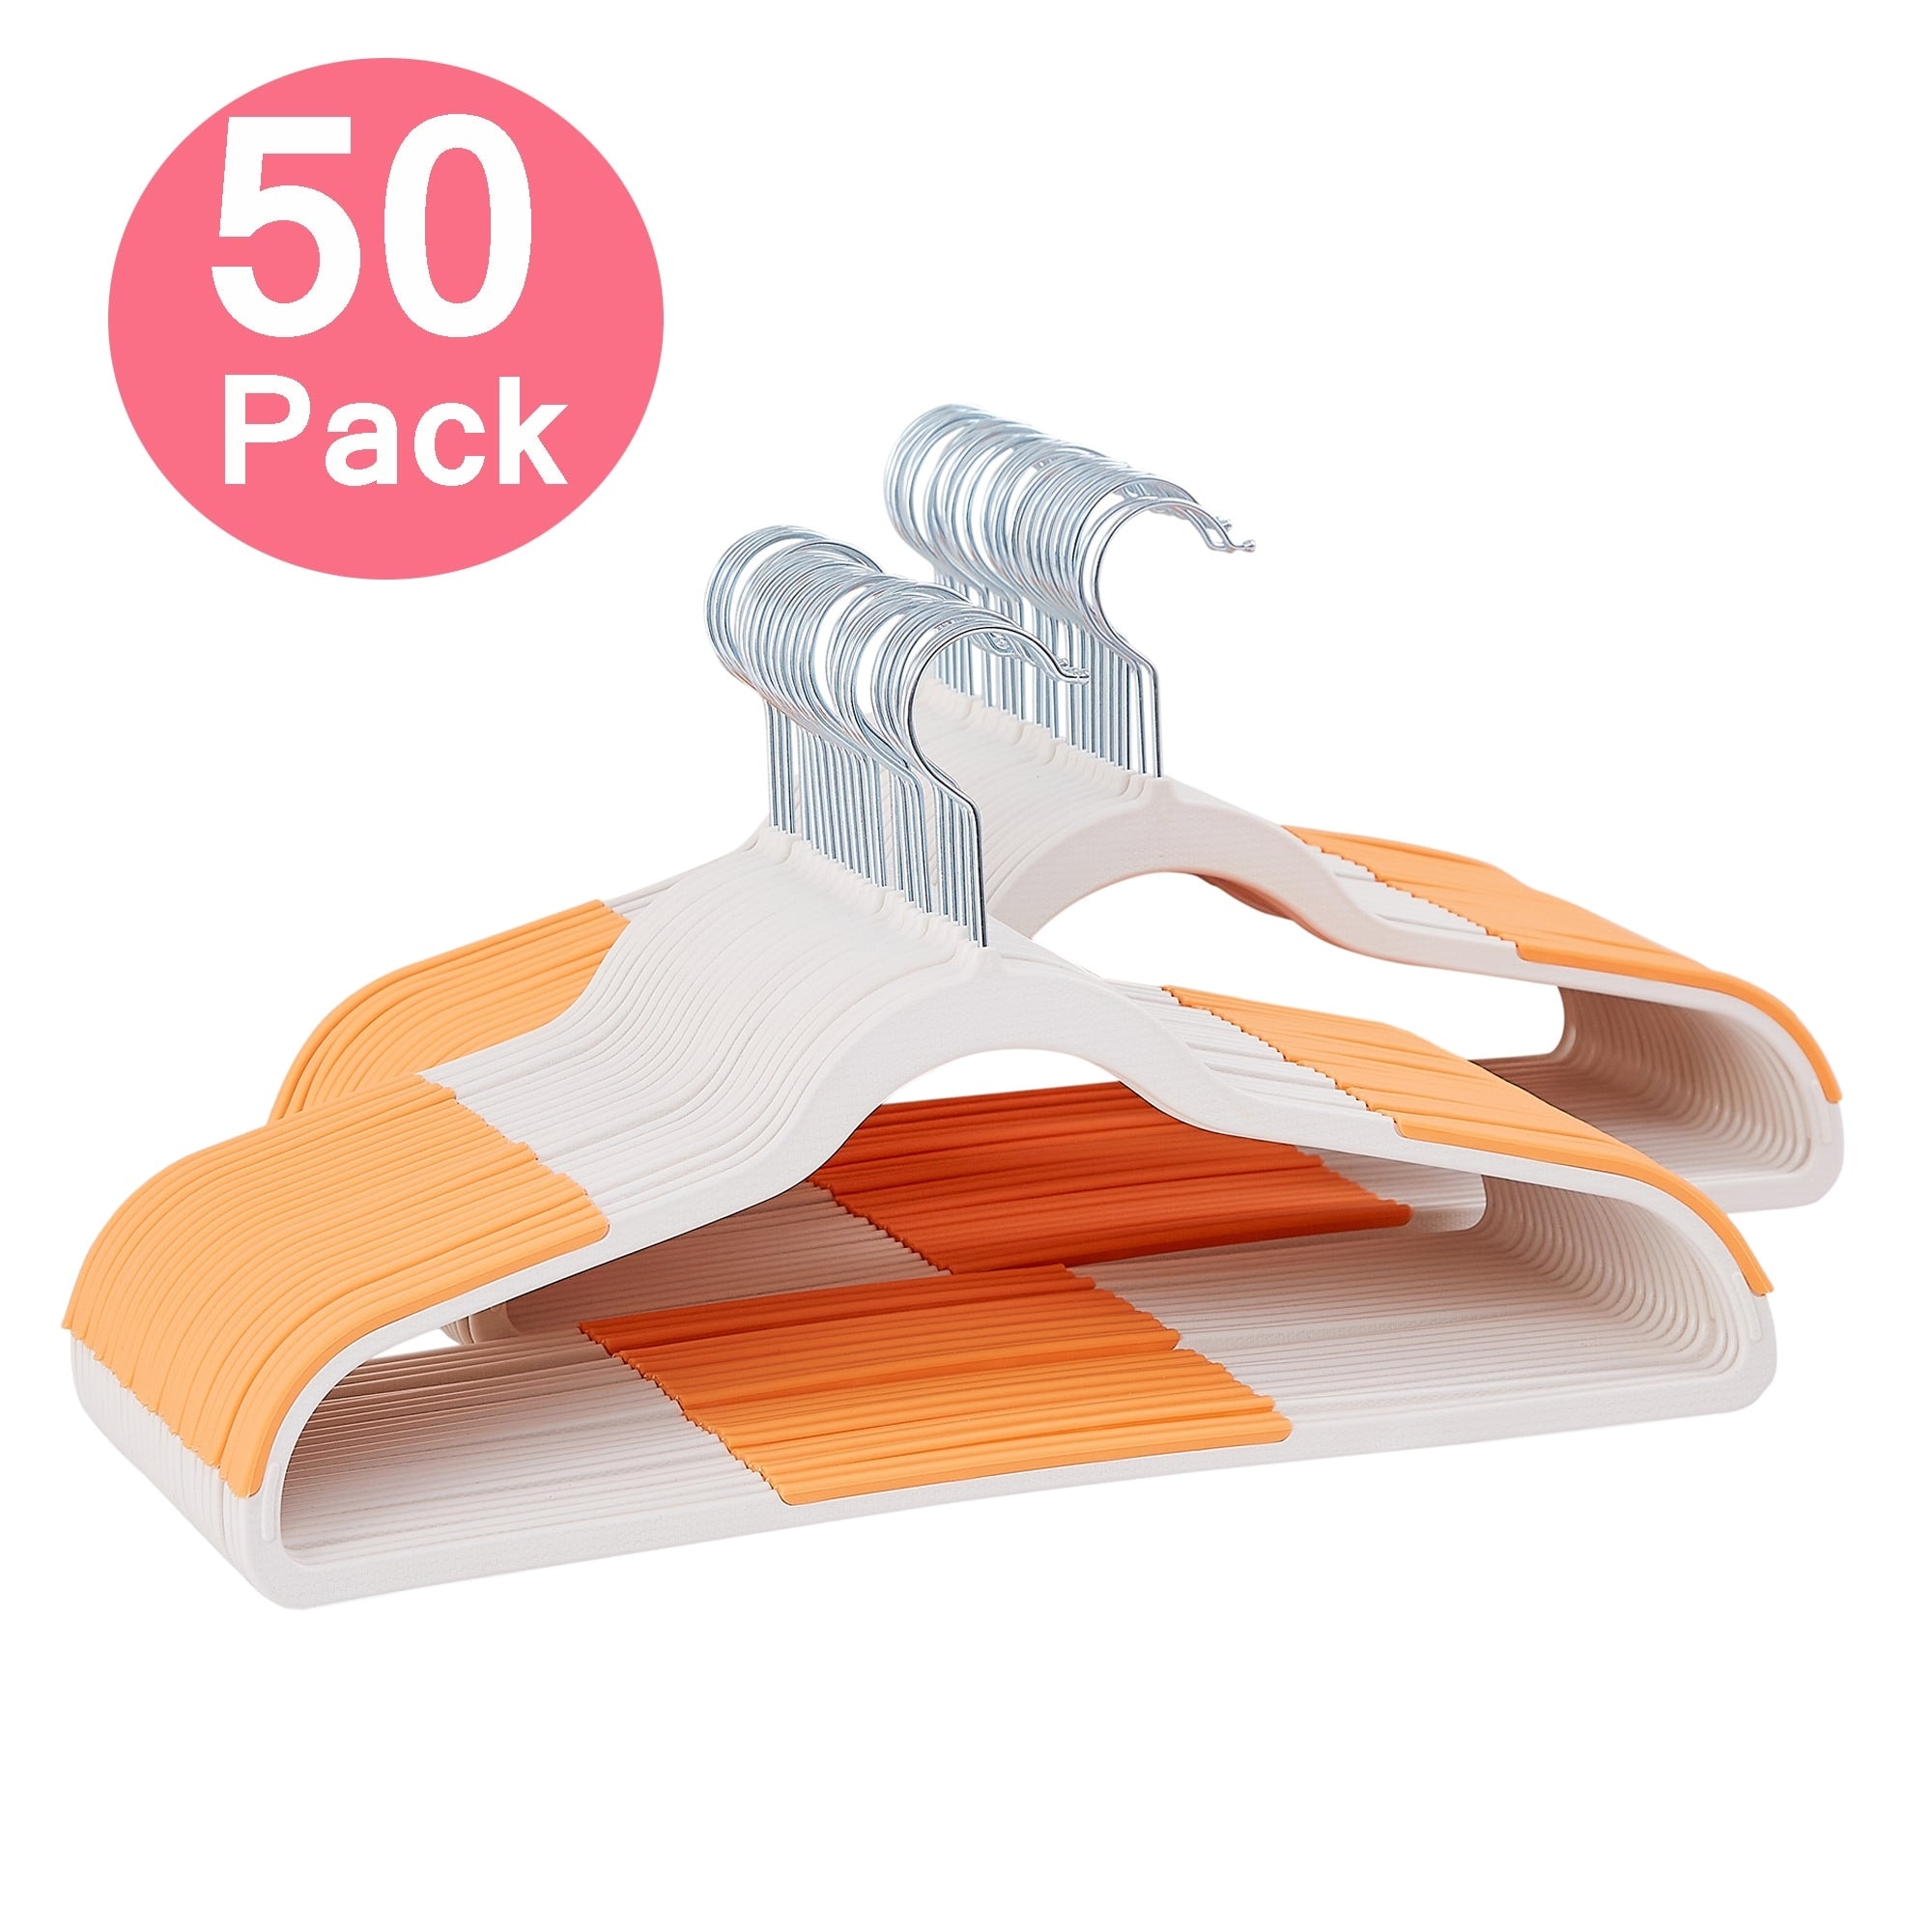 VECELO Wet and Dry Adult Hangers Holds Up To 10 Lbs, Clothes Hangers(25/50  Packs Option) - Bed Bath & Beyond - 39000235